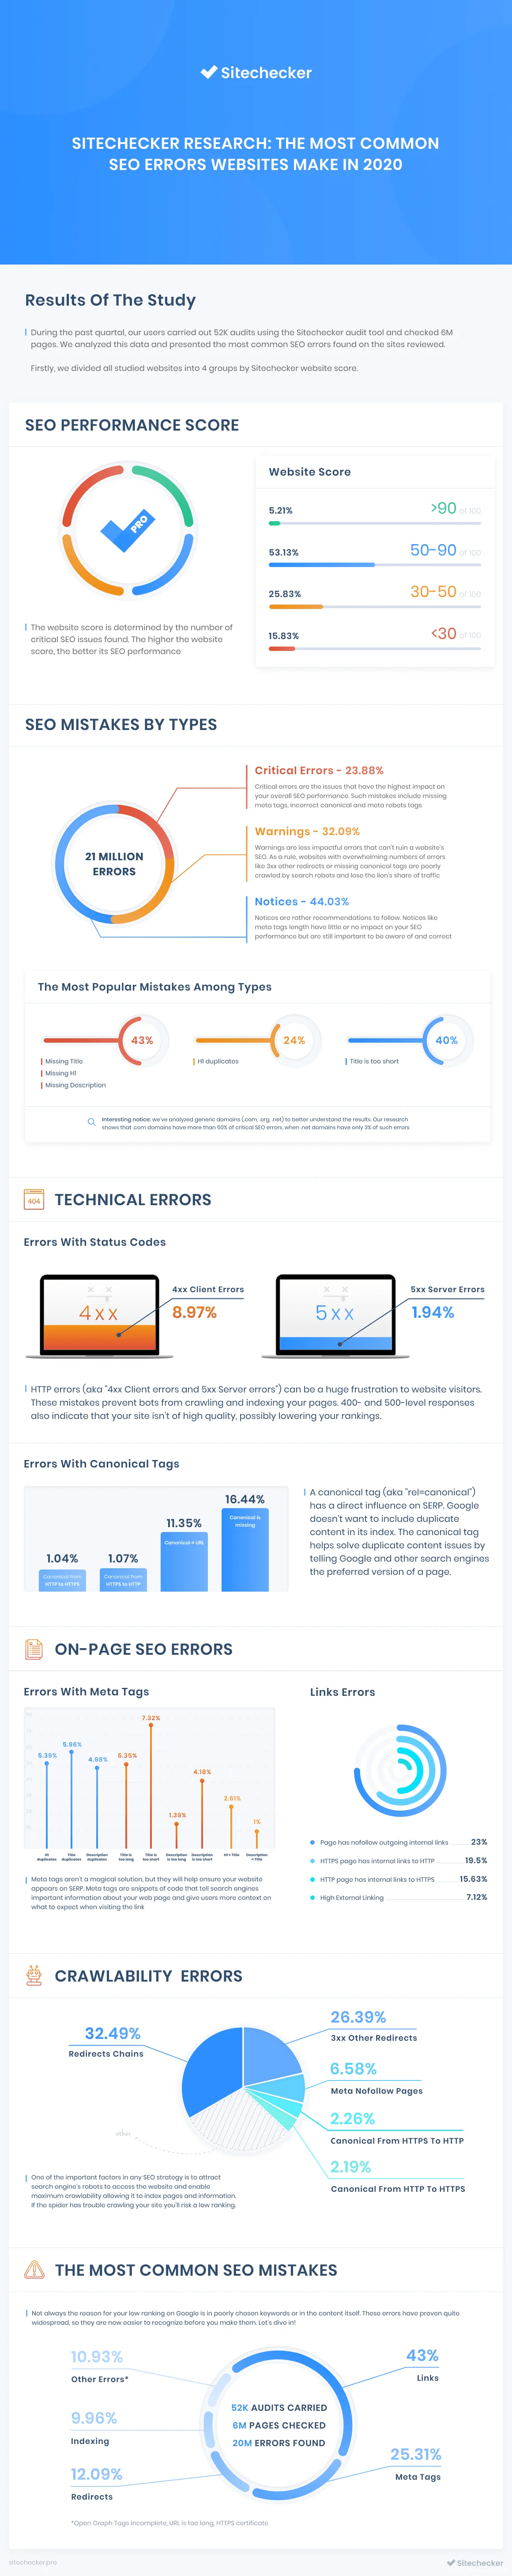 The Most Common SEO Errors Websites Make in 2020